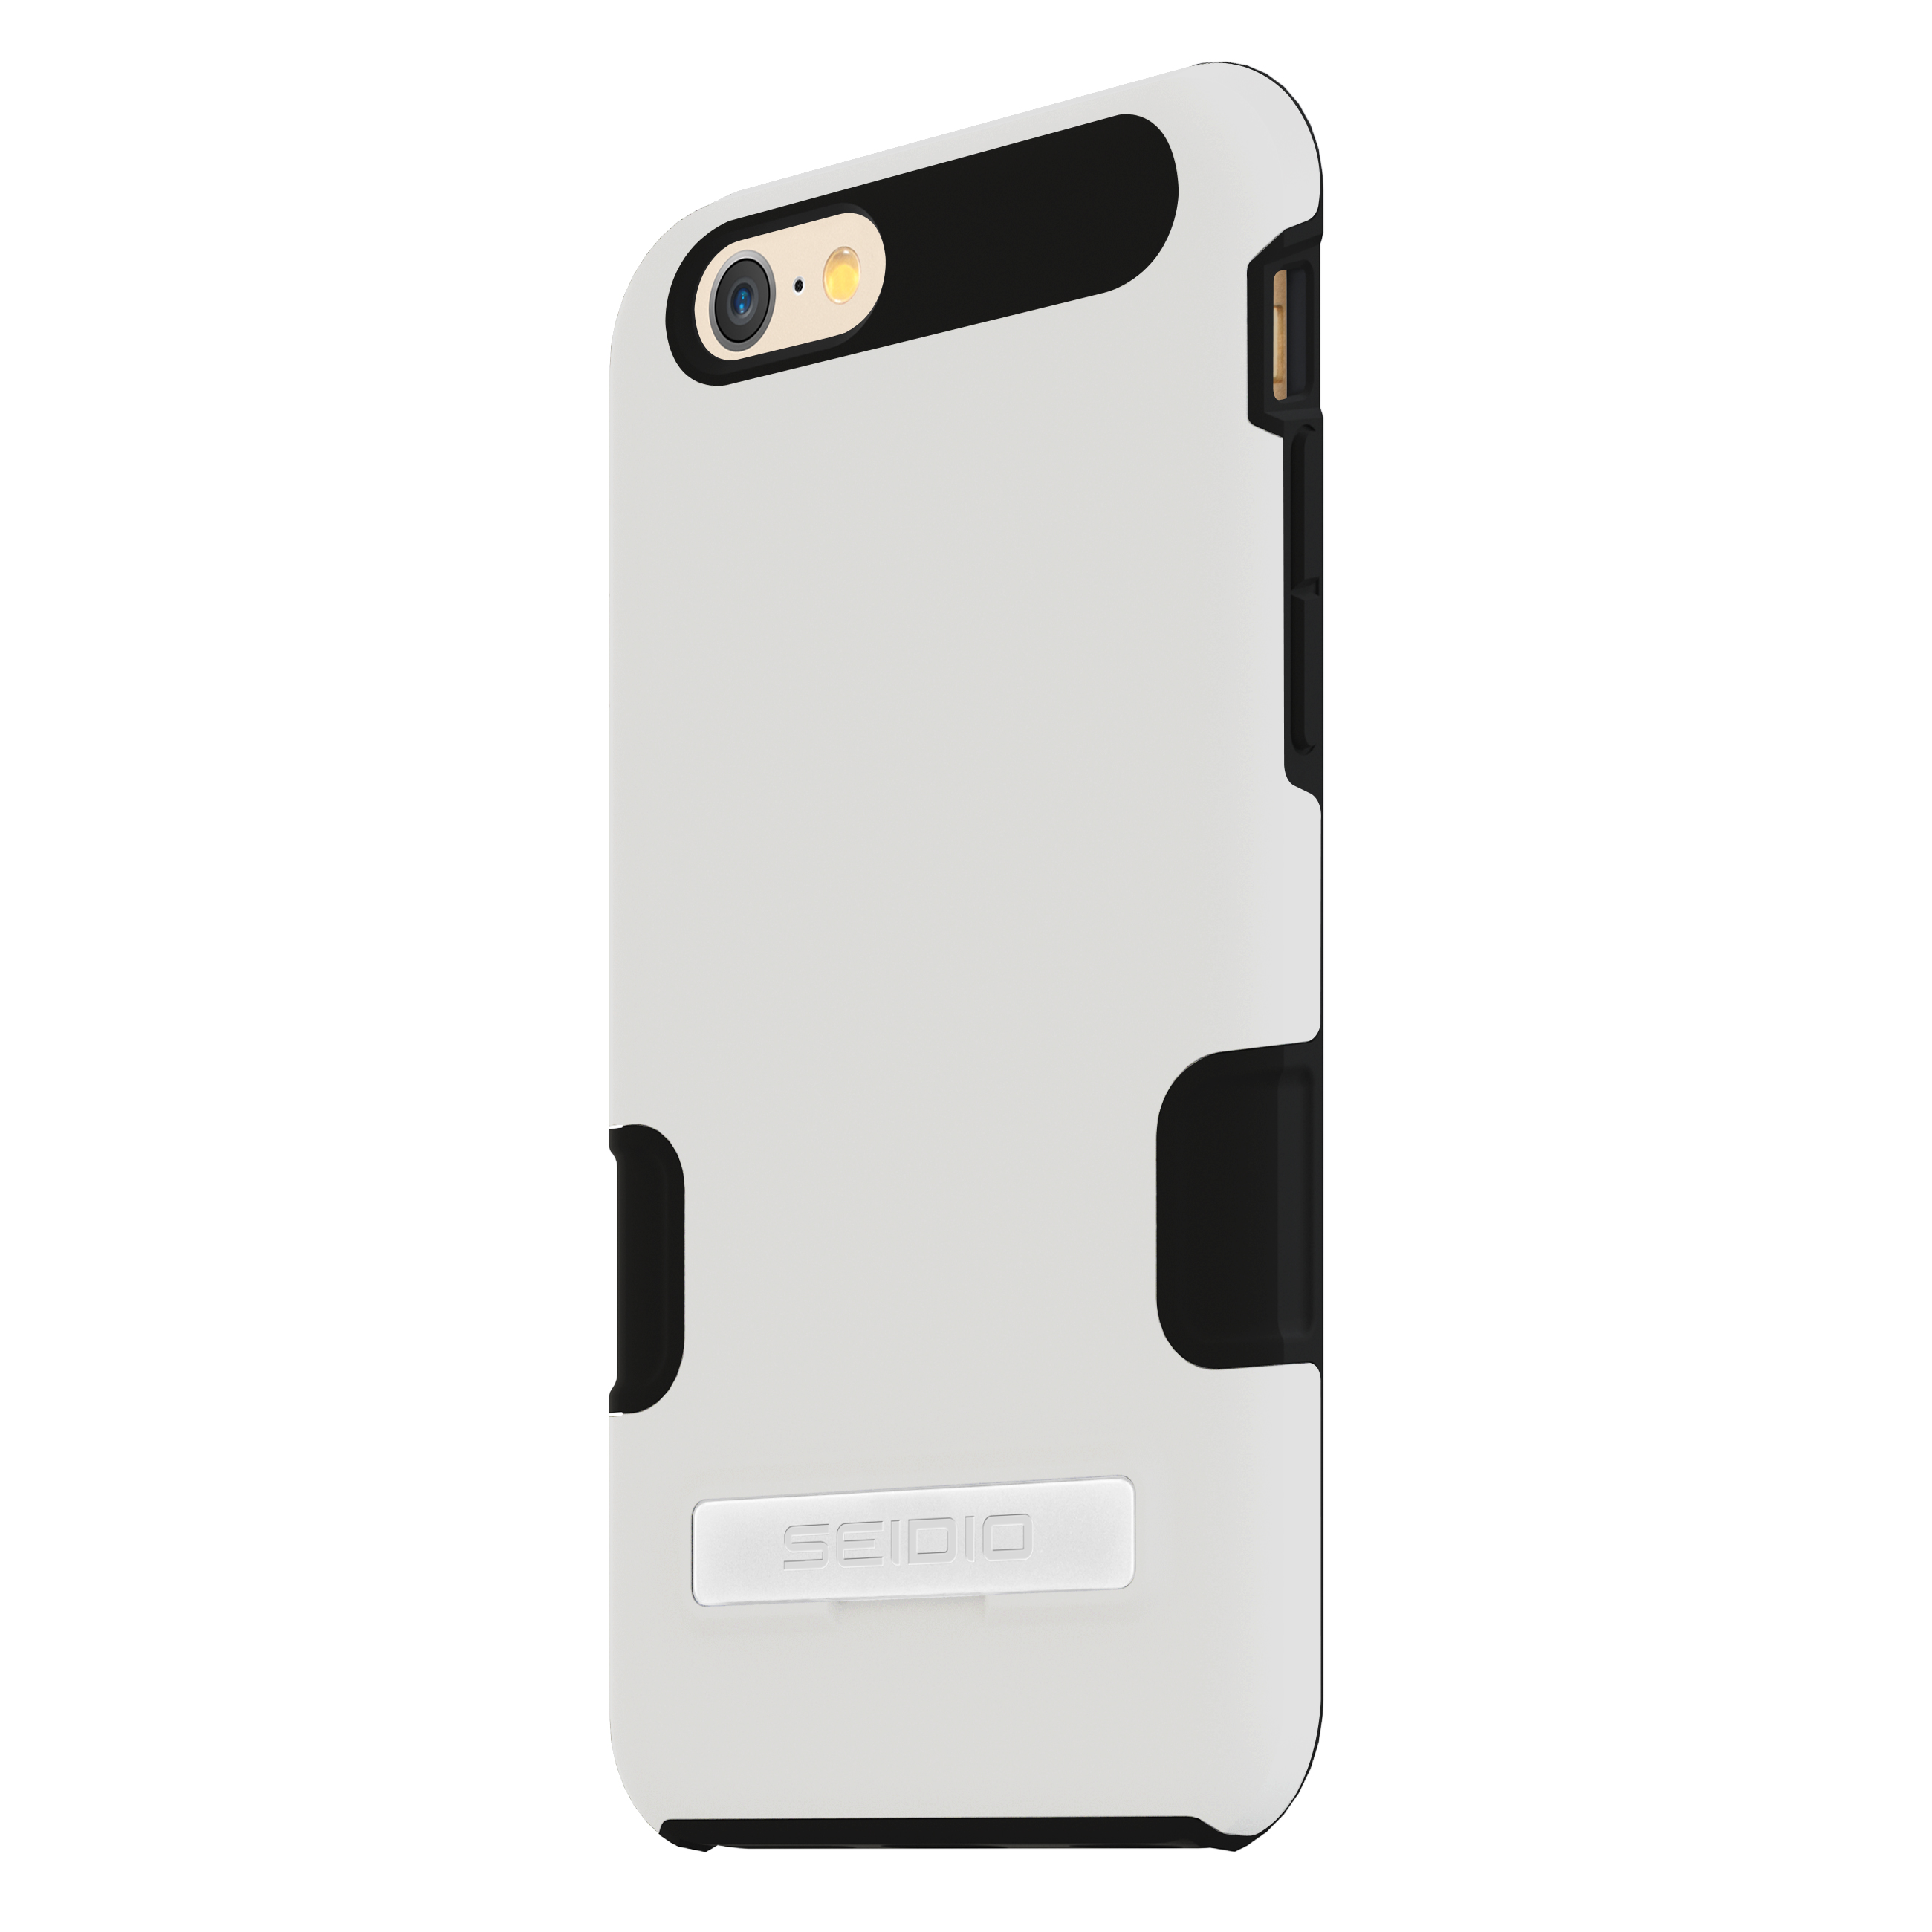 DILEX Pro with Metal Kickstand - Glossed White, iPhone 6/6s